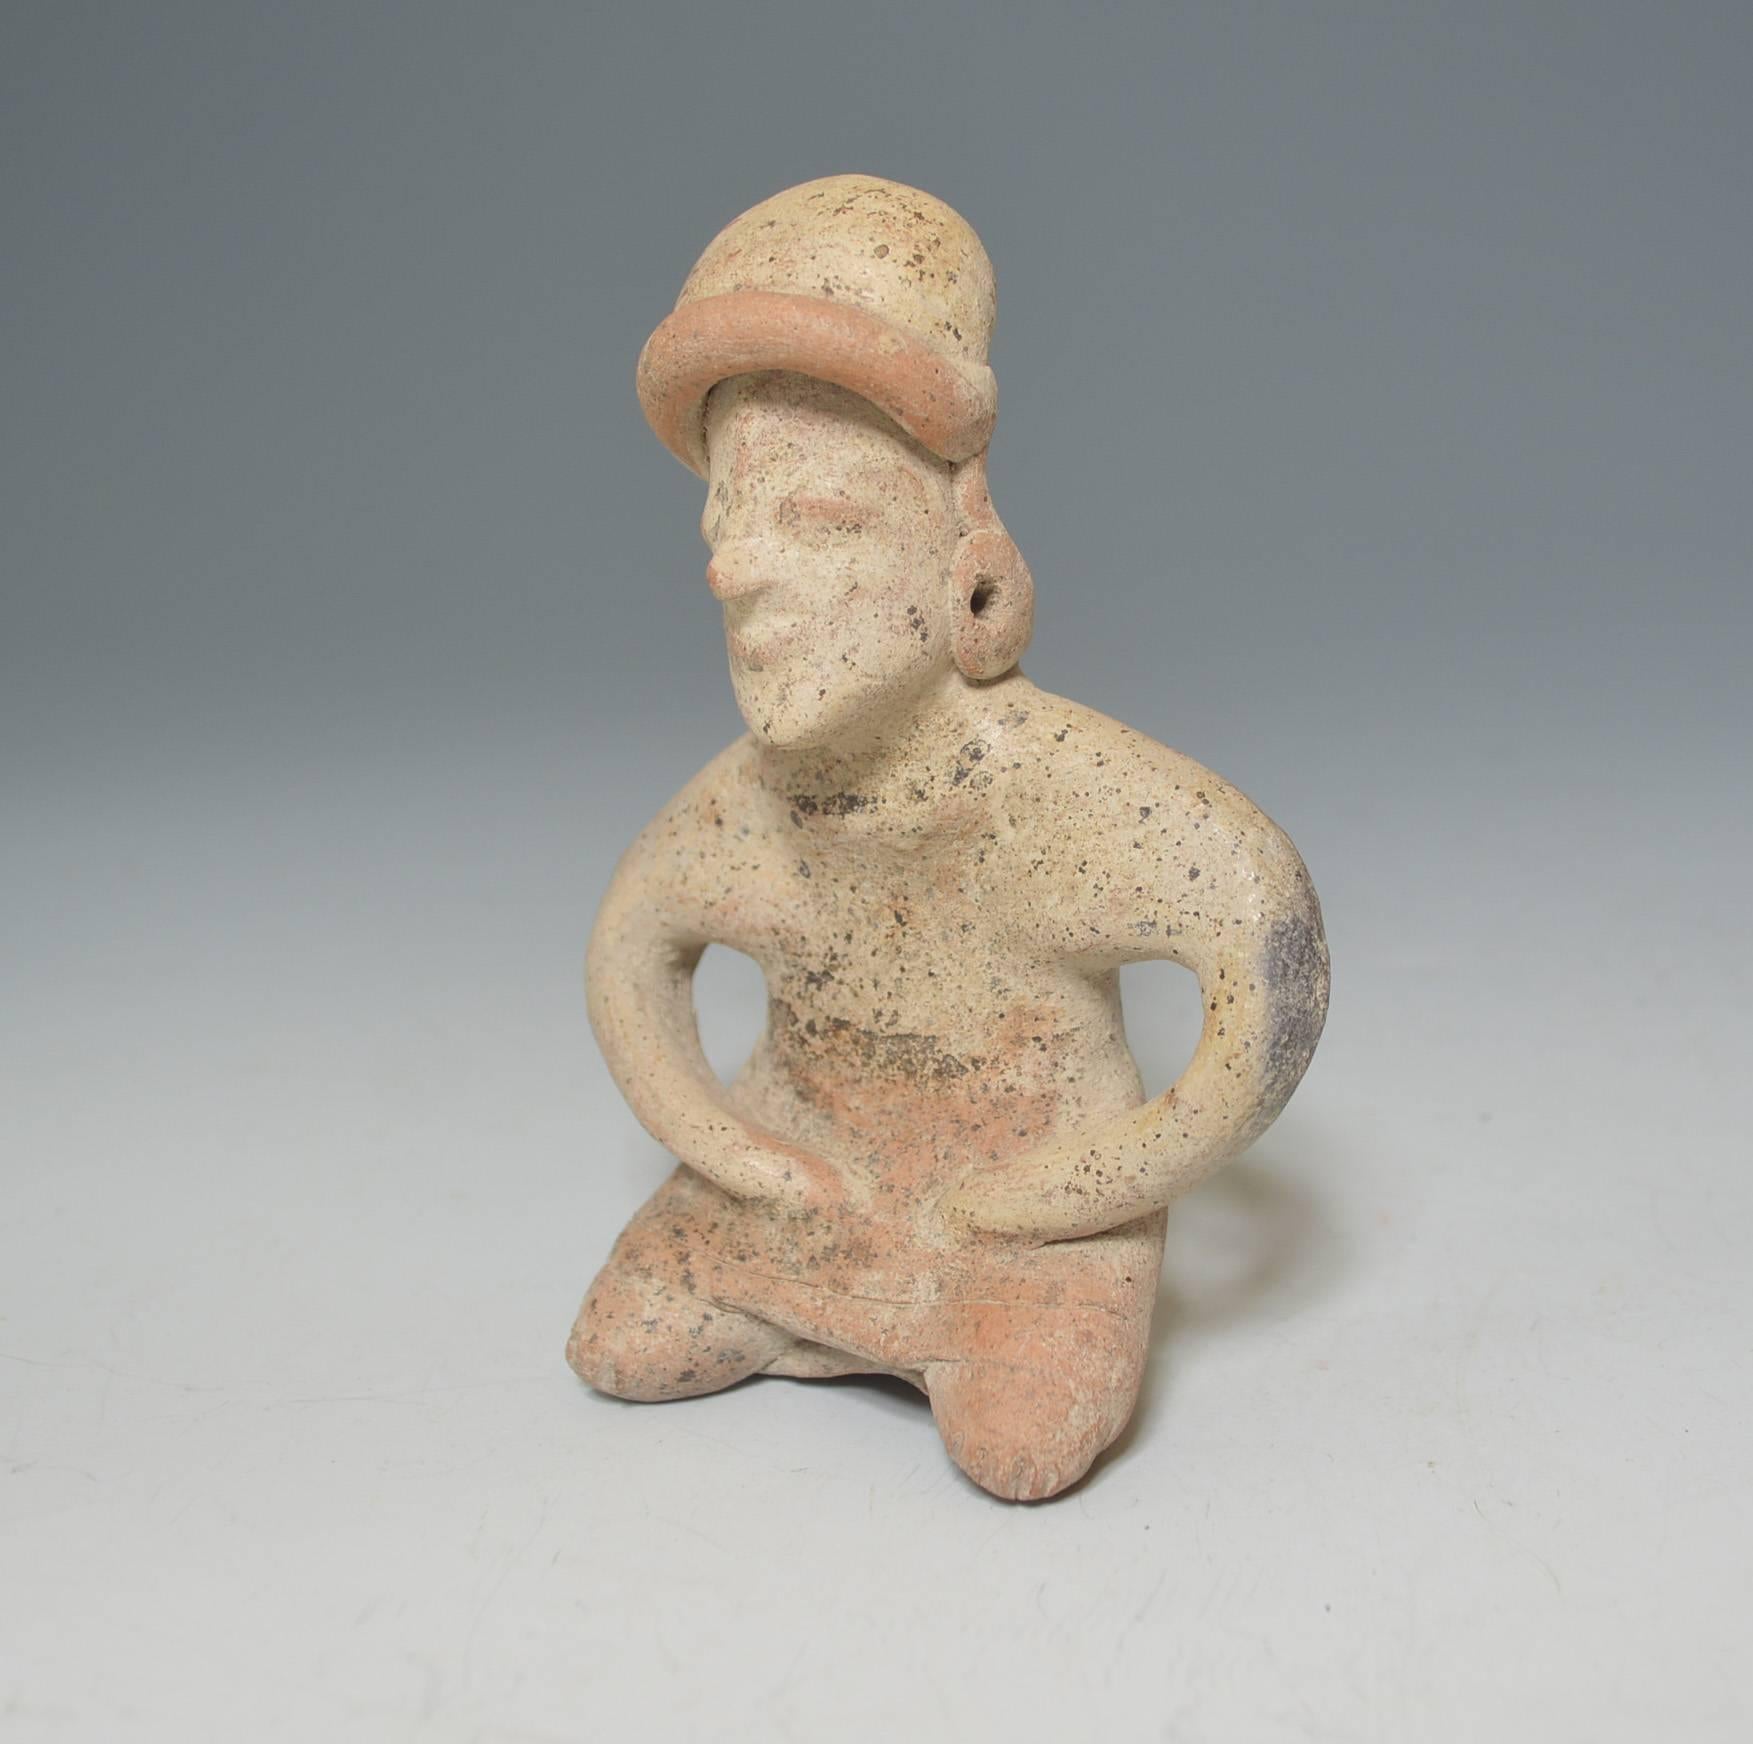 A pre Columbian ancient Mexico Nayarit figure, BC 200–AD 200 

A male seated solid body pottery figure with head band and earrings

Measures: Height 16 cm

Condition: good

Ex UK collection before 1960.